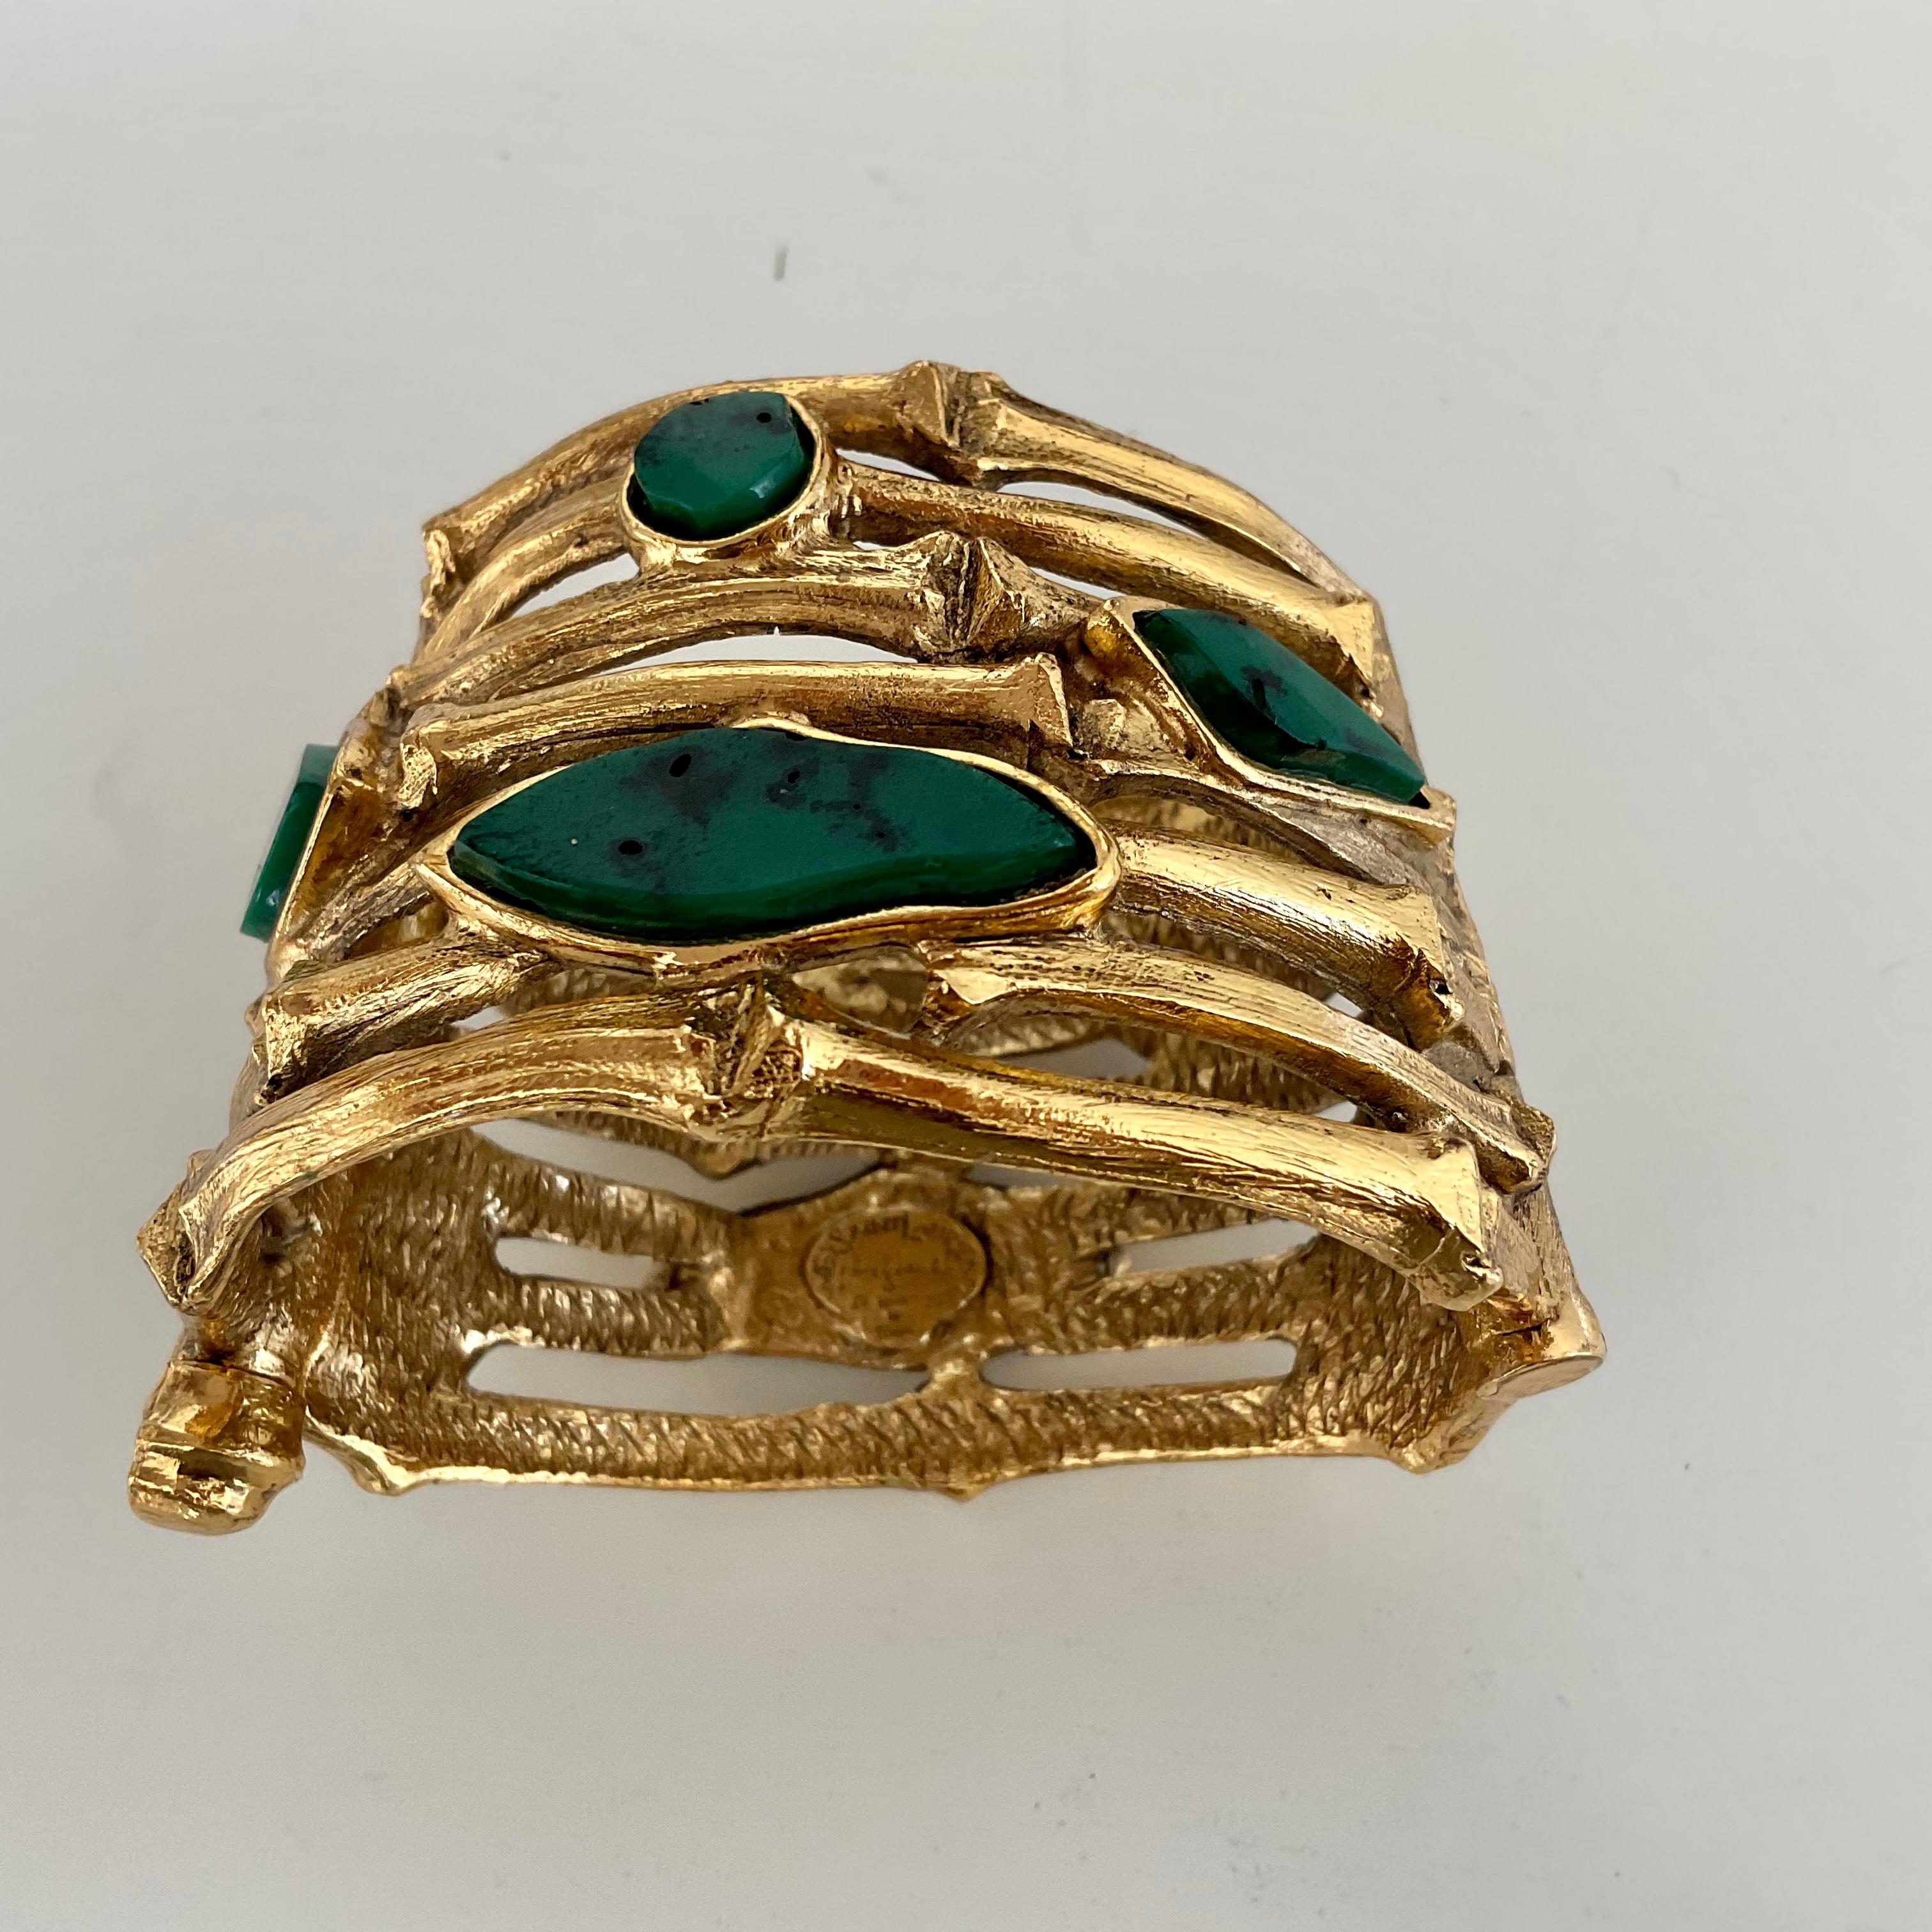 This unique vintage from Yves Saint Laurent from the 70's is a gold-plated clamper/cuff bracelet. Designed like branches of bamboo, there are different-shaped, naturally looking, green to black-toned stones in resin. On the inside, this rare product